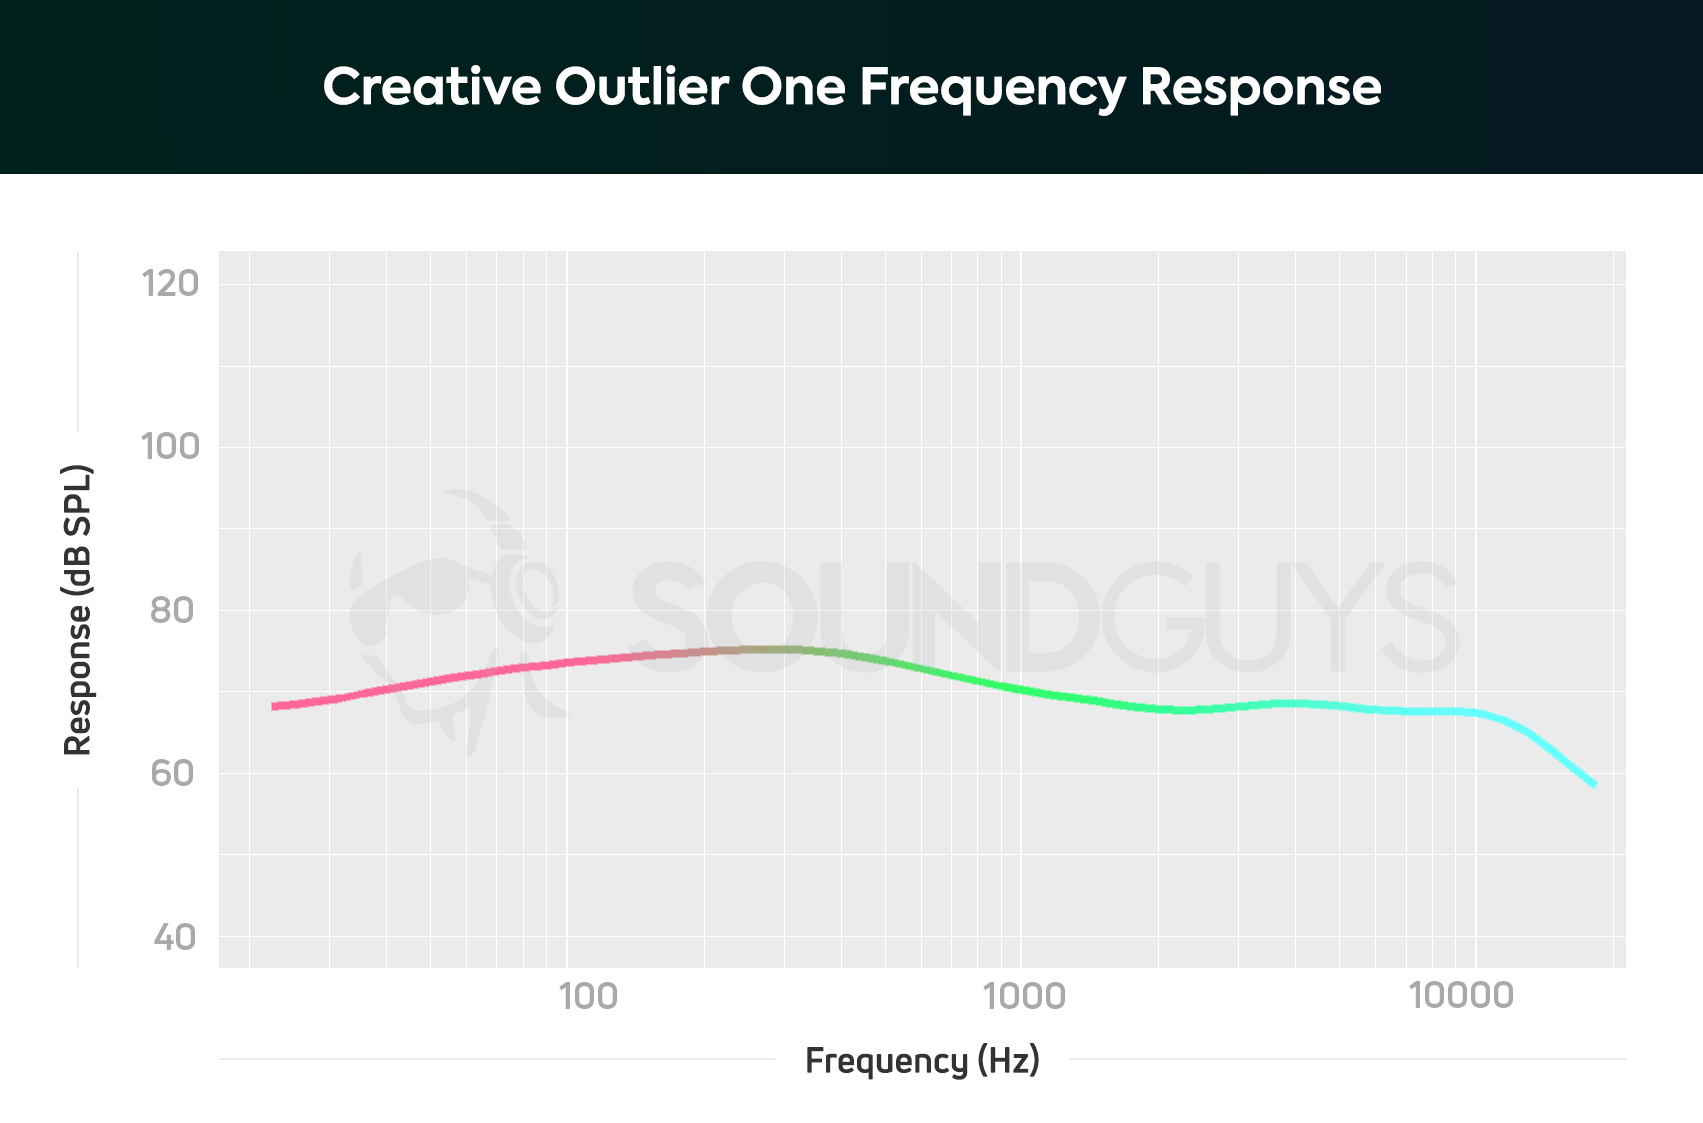 Creative Outlier One frequency response.